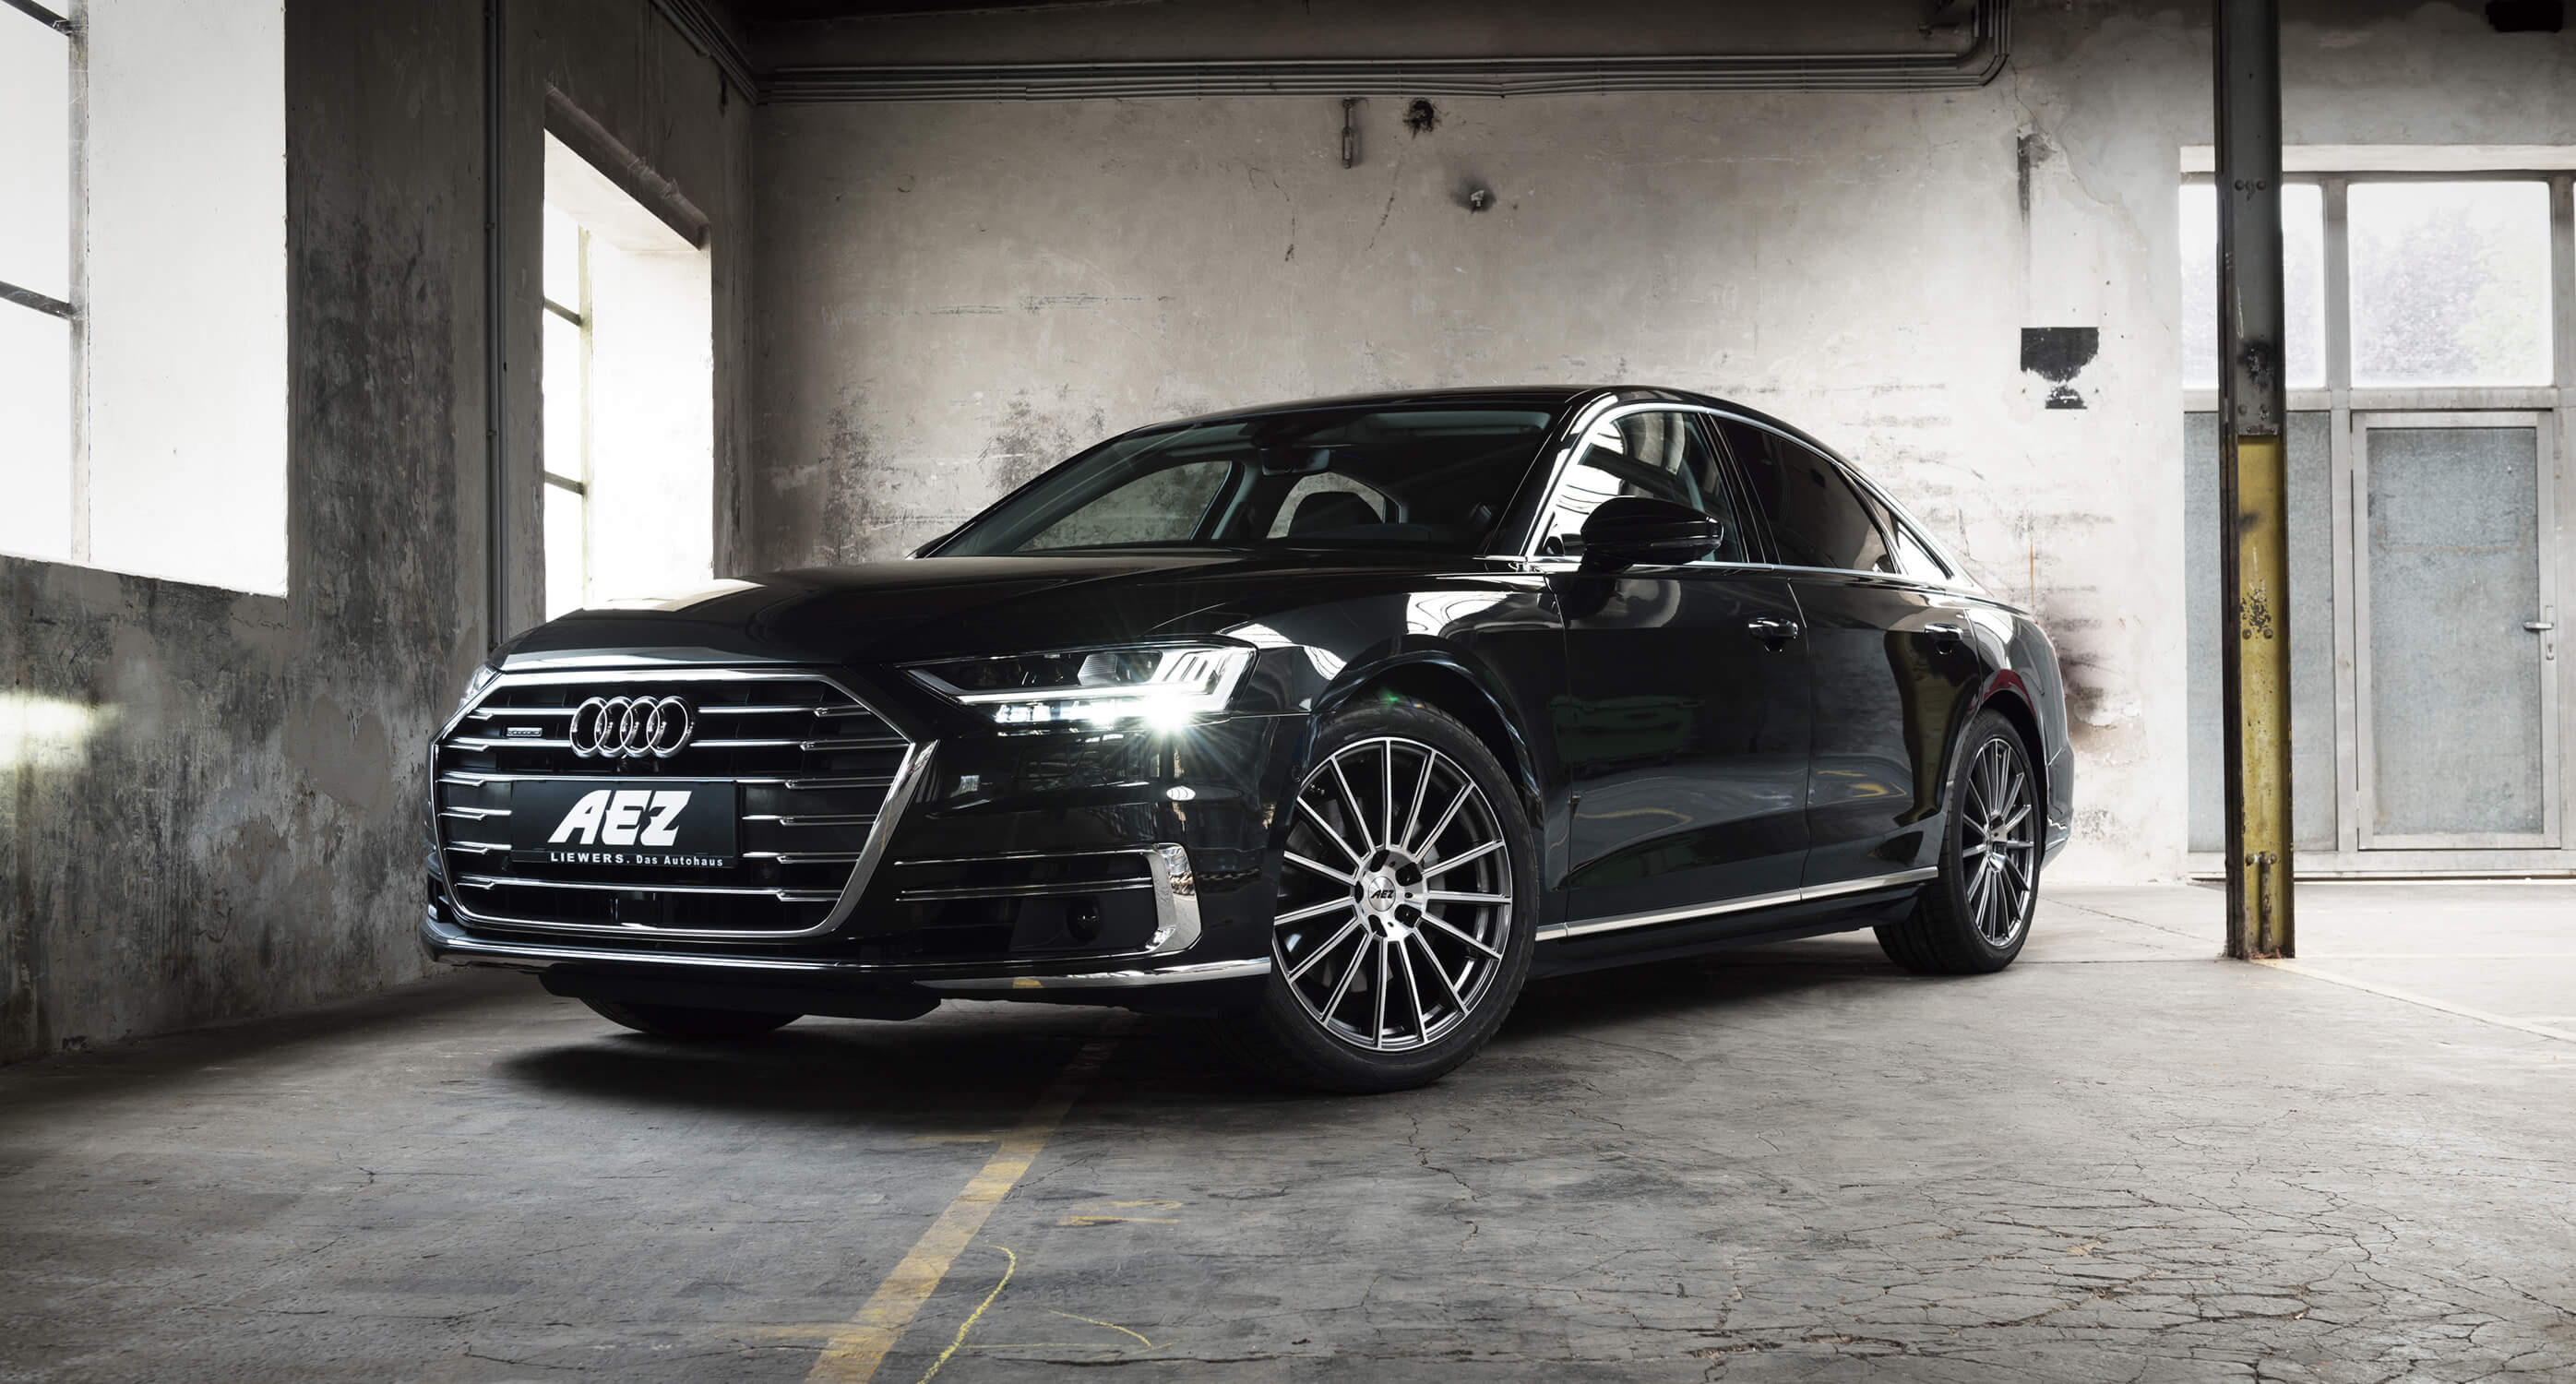 The new Audi A8 on AEZ Steam